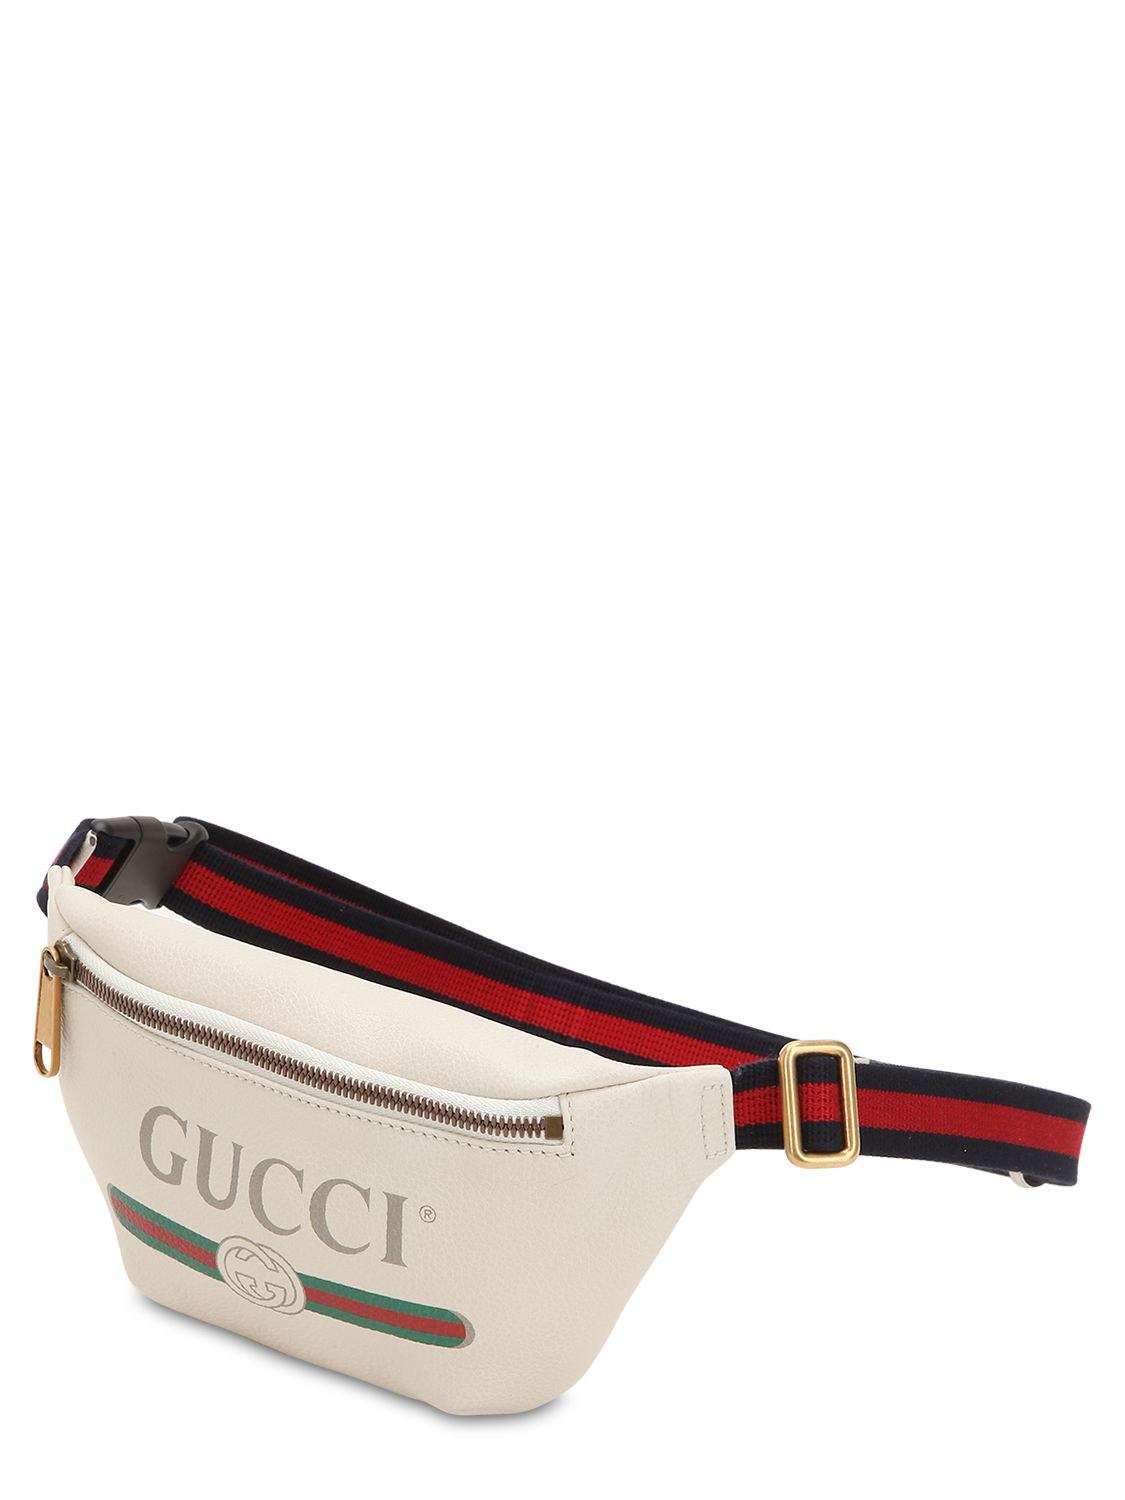 Gucci Small Vintage Logo Leather Belt Bag in White for Men - Lyst